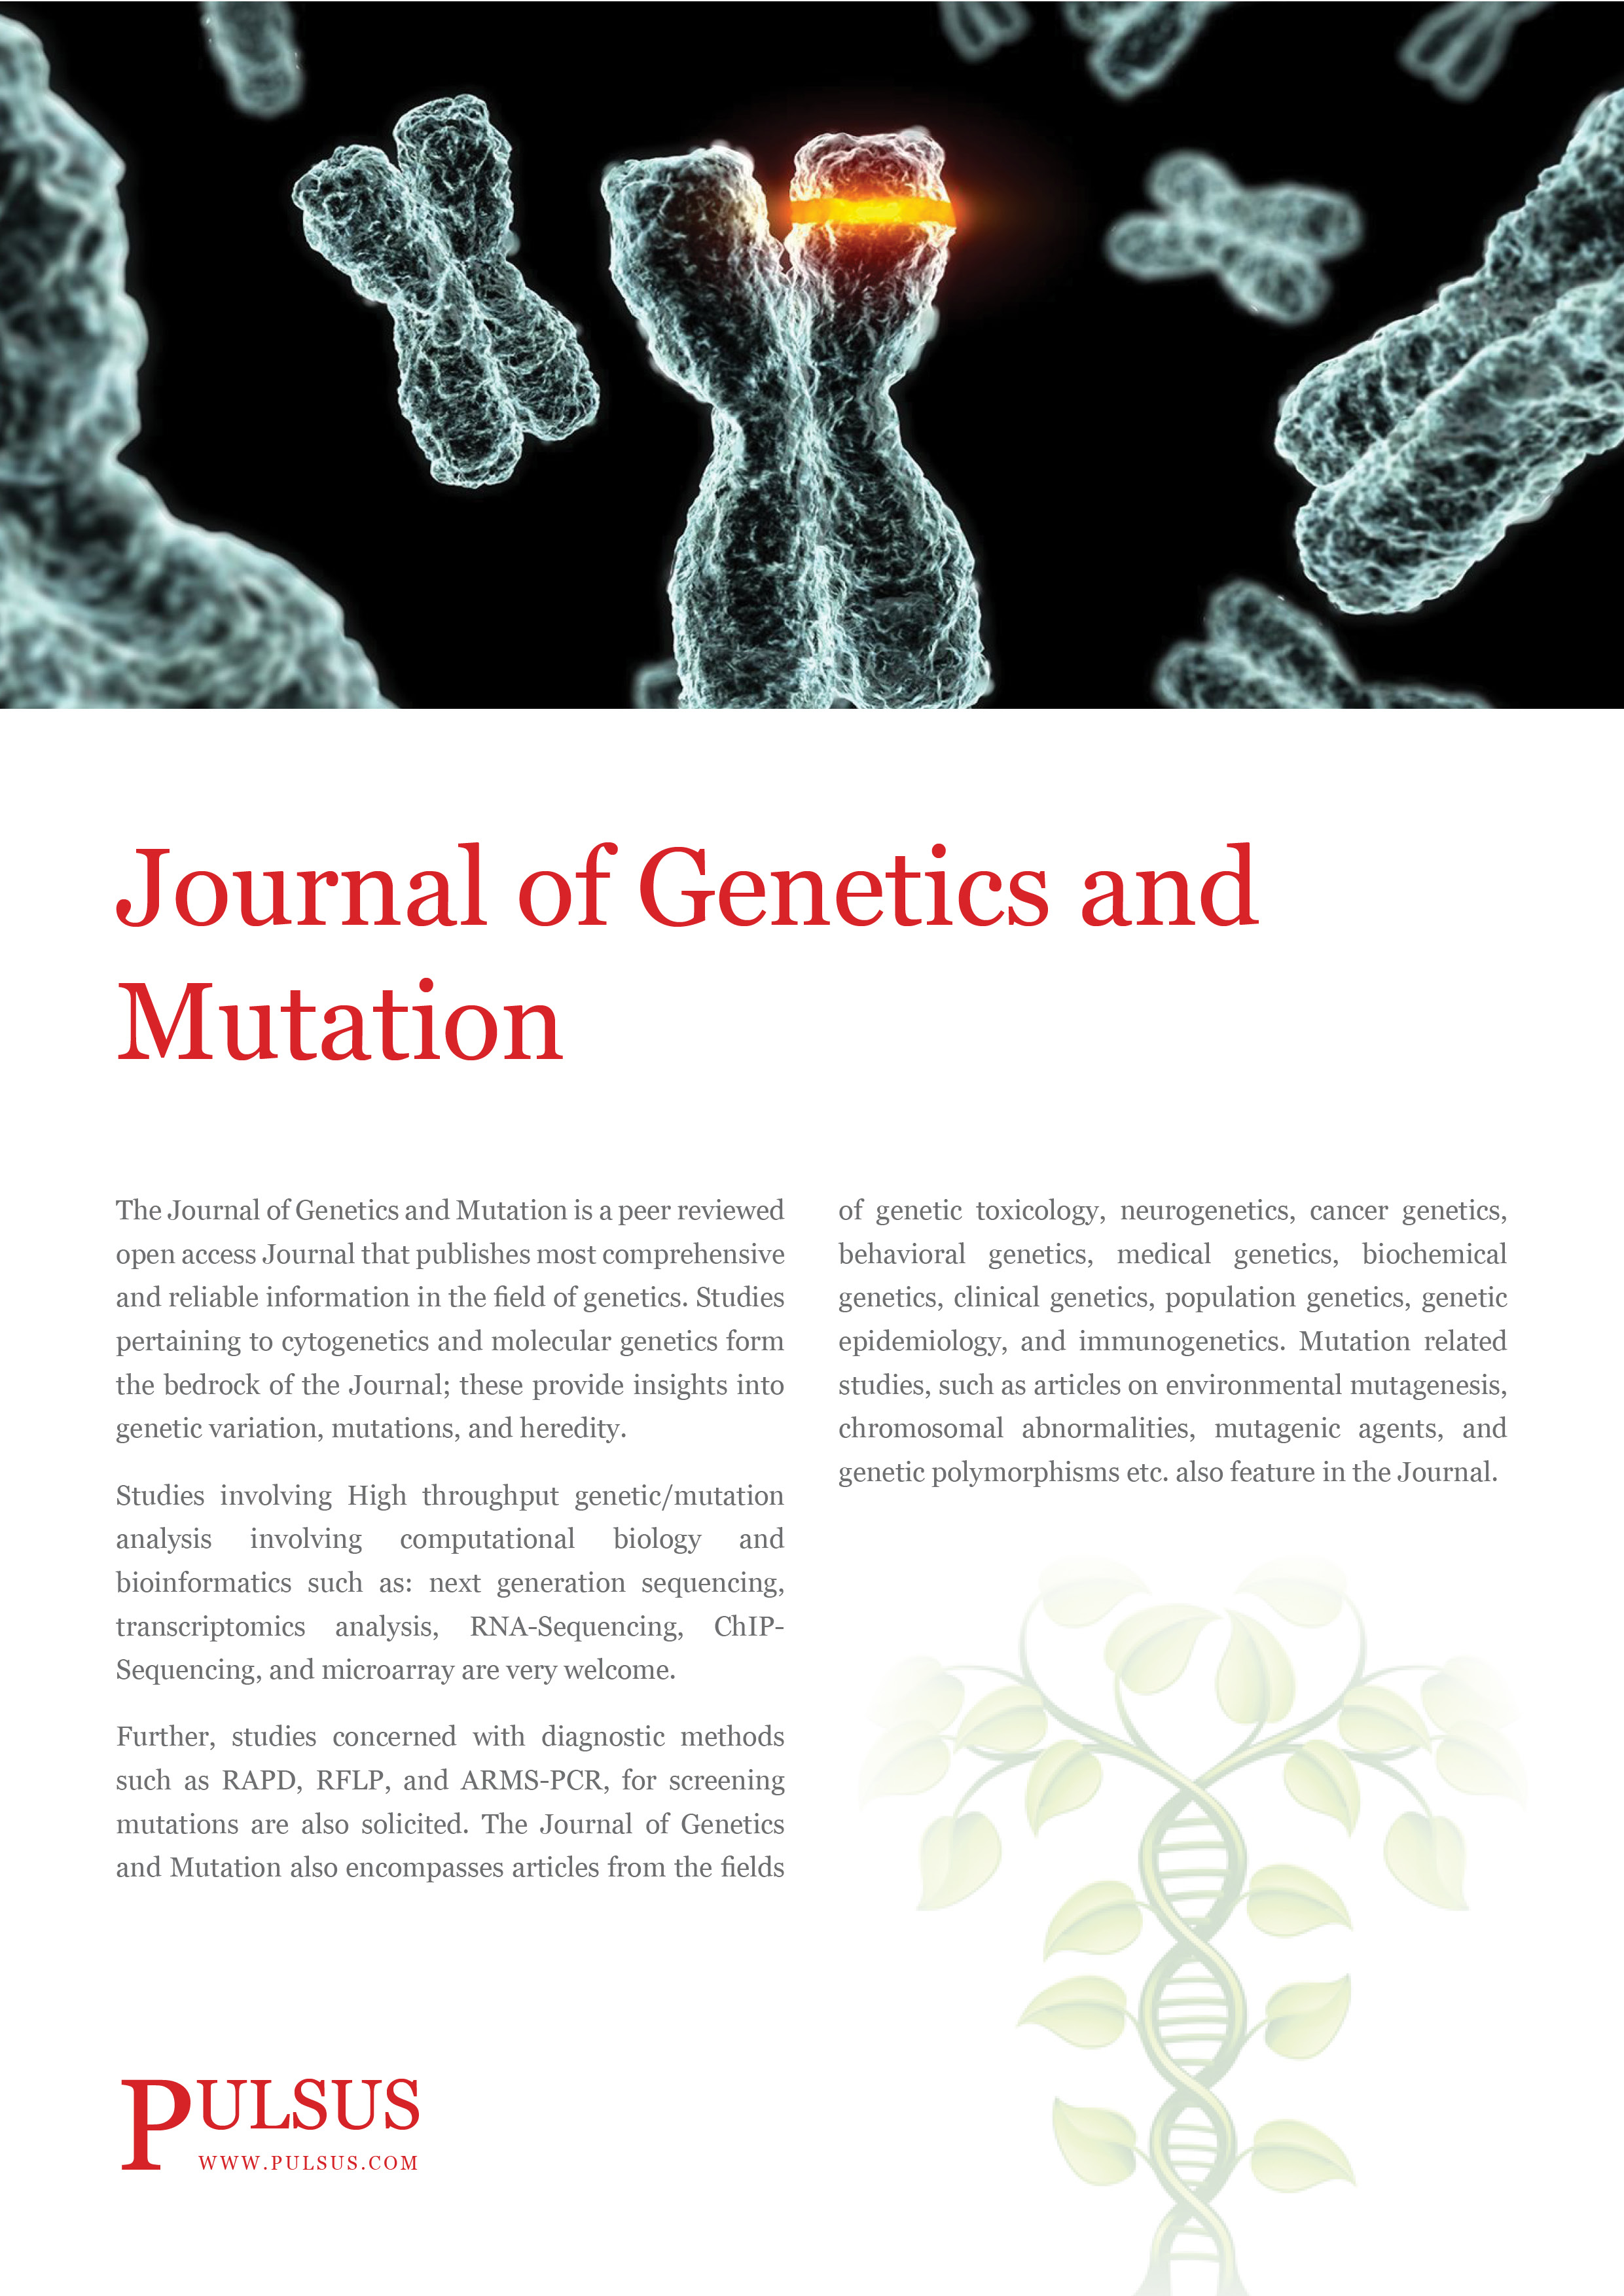 research article in genetics